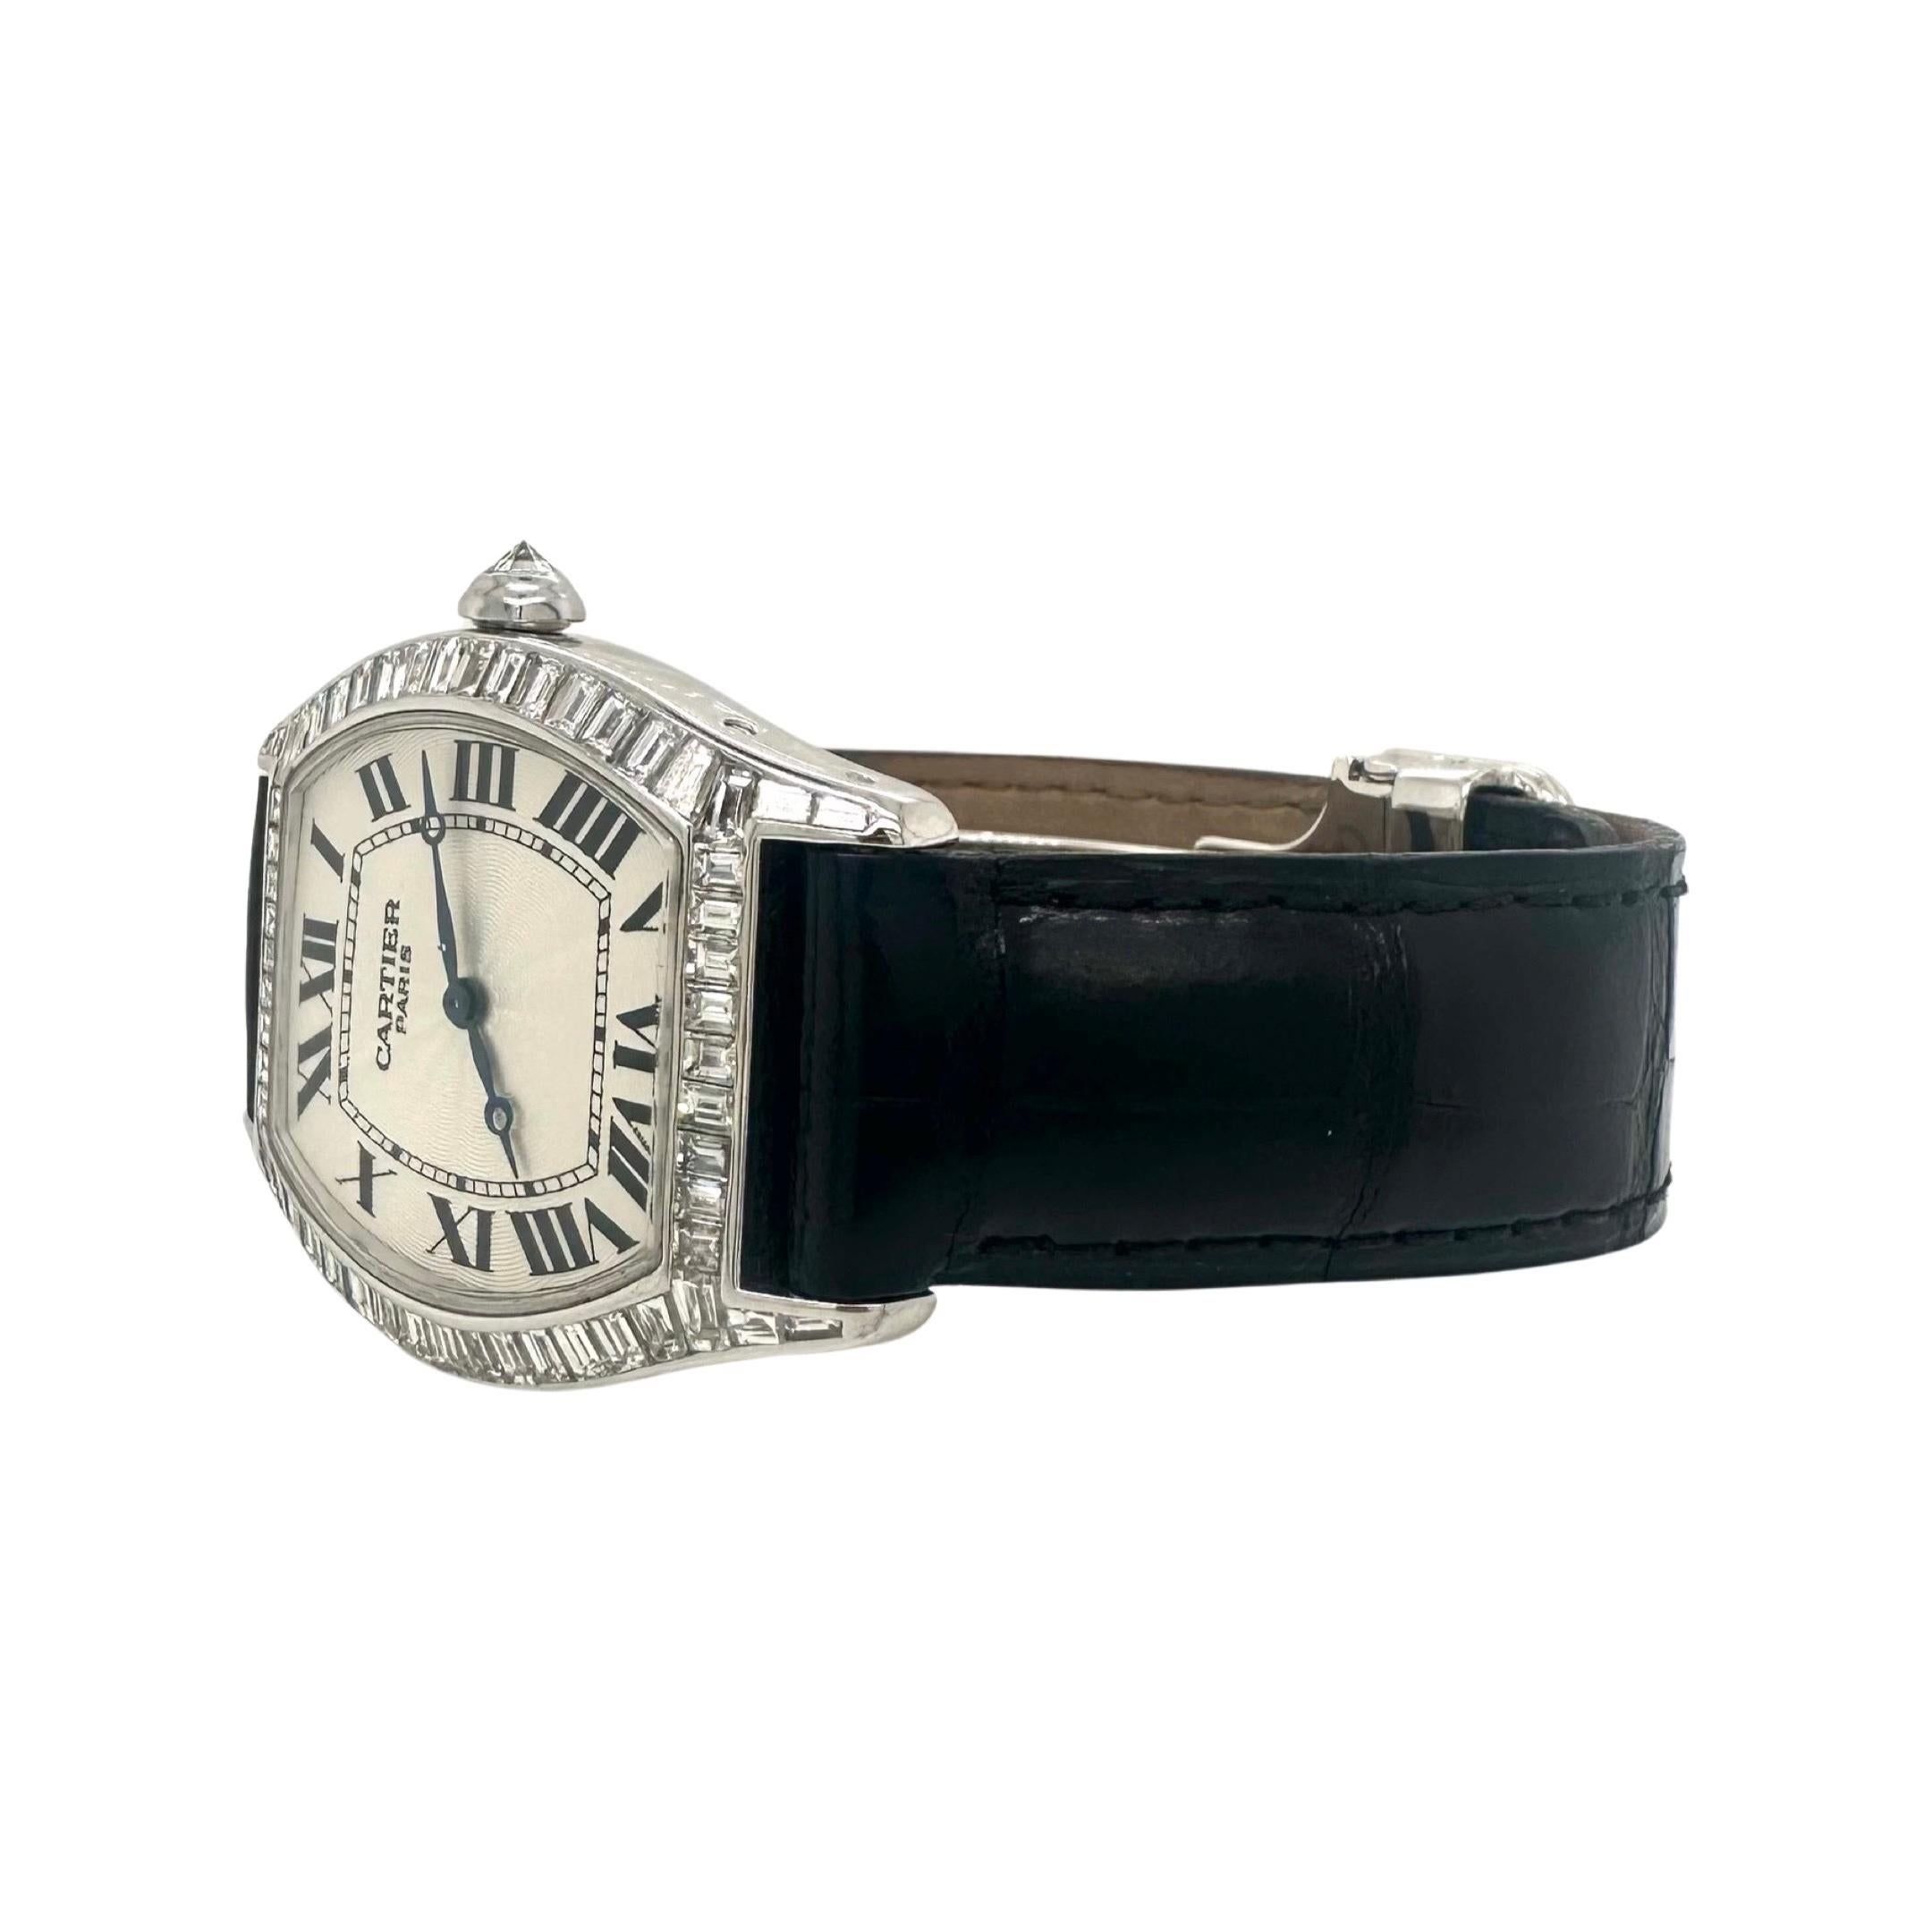 Brand: Cartier​​​​​​​

Model Name: Tortue

Model Number: Y-160

Movement: Automatic

Case Size: 44 mm 

Dial Color:  White

Metal: 18K White Gold

Stones: Baguette Diamonds

Hour Markers: Roman Numerals 

Crystal: Sapphire Crystal

Includes: